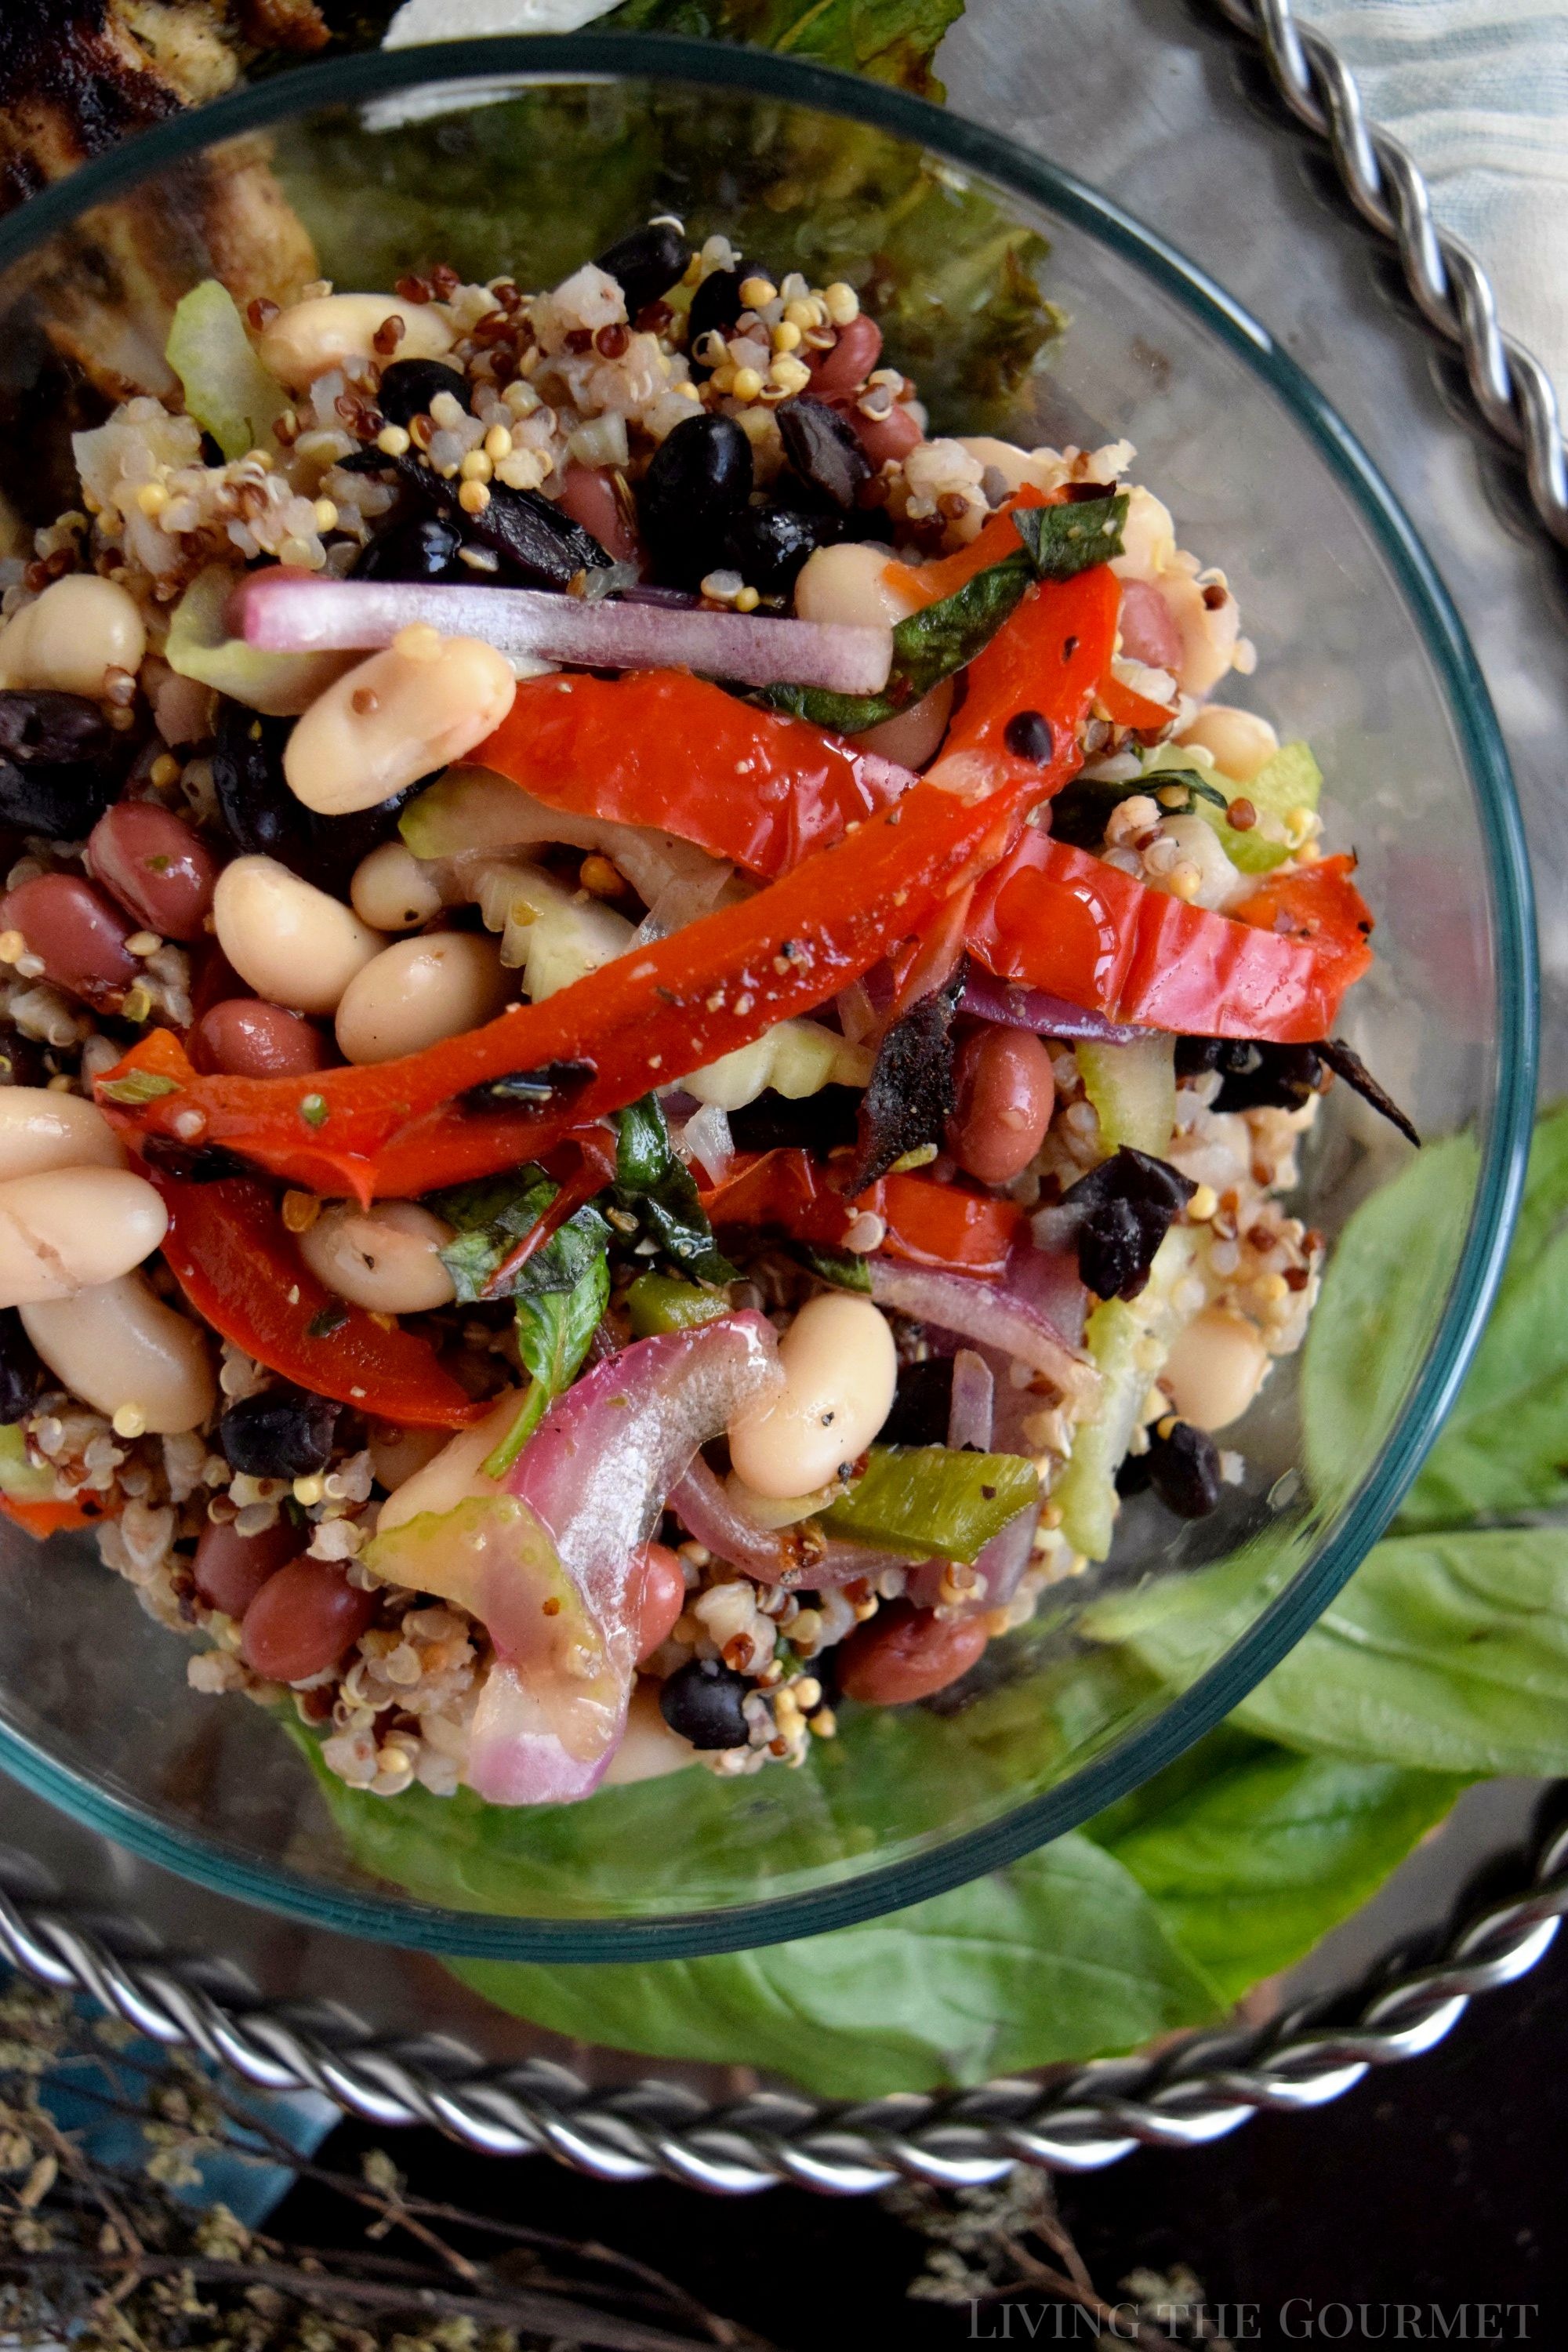 Living the Gourmet: Packed with protein, fiber, and nutrients, this Ancient Grains Three Bean Salad is served with Grilled Chicken for hearty, healthy summer meal. #vhblends #clvr